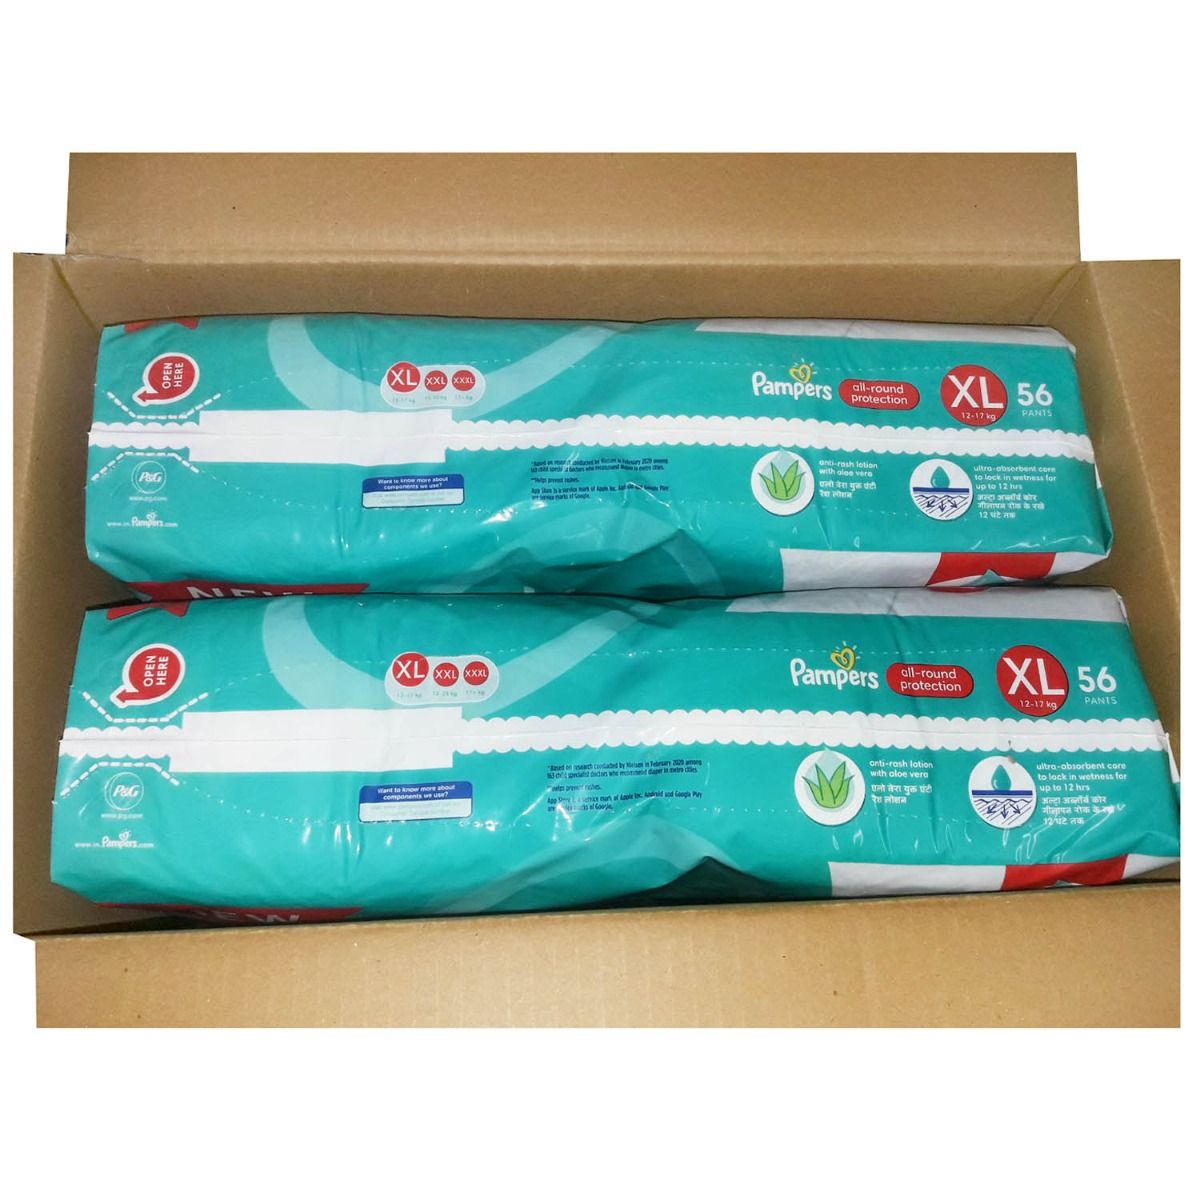 Pampers All-Round Protection Diaper Pants XL, 112 Count (2 x 56 Diapers), Pack of 1 